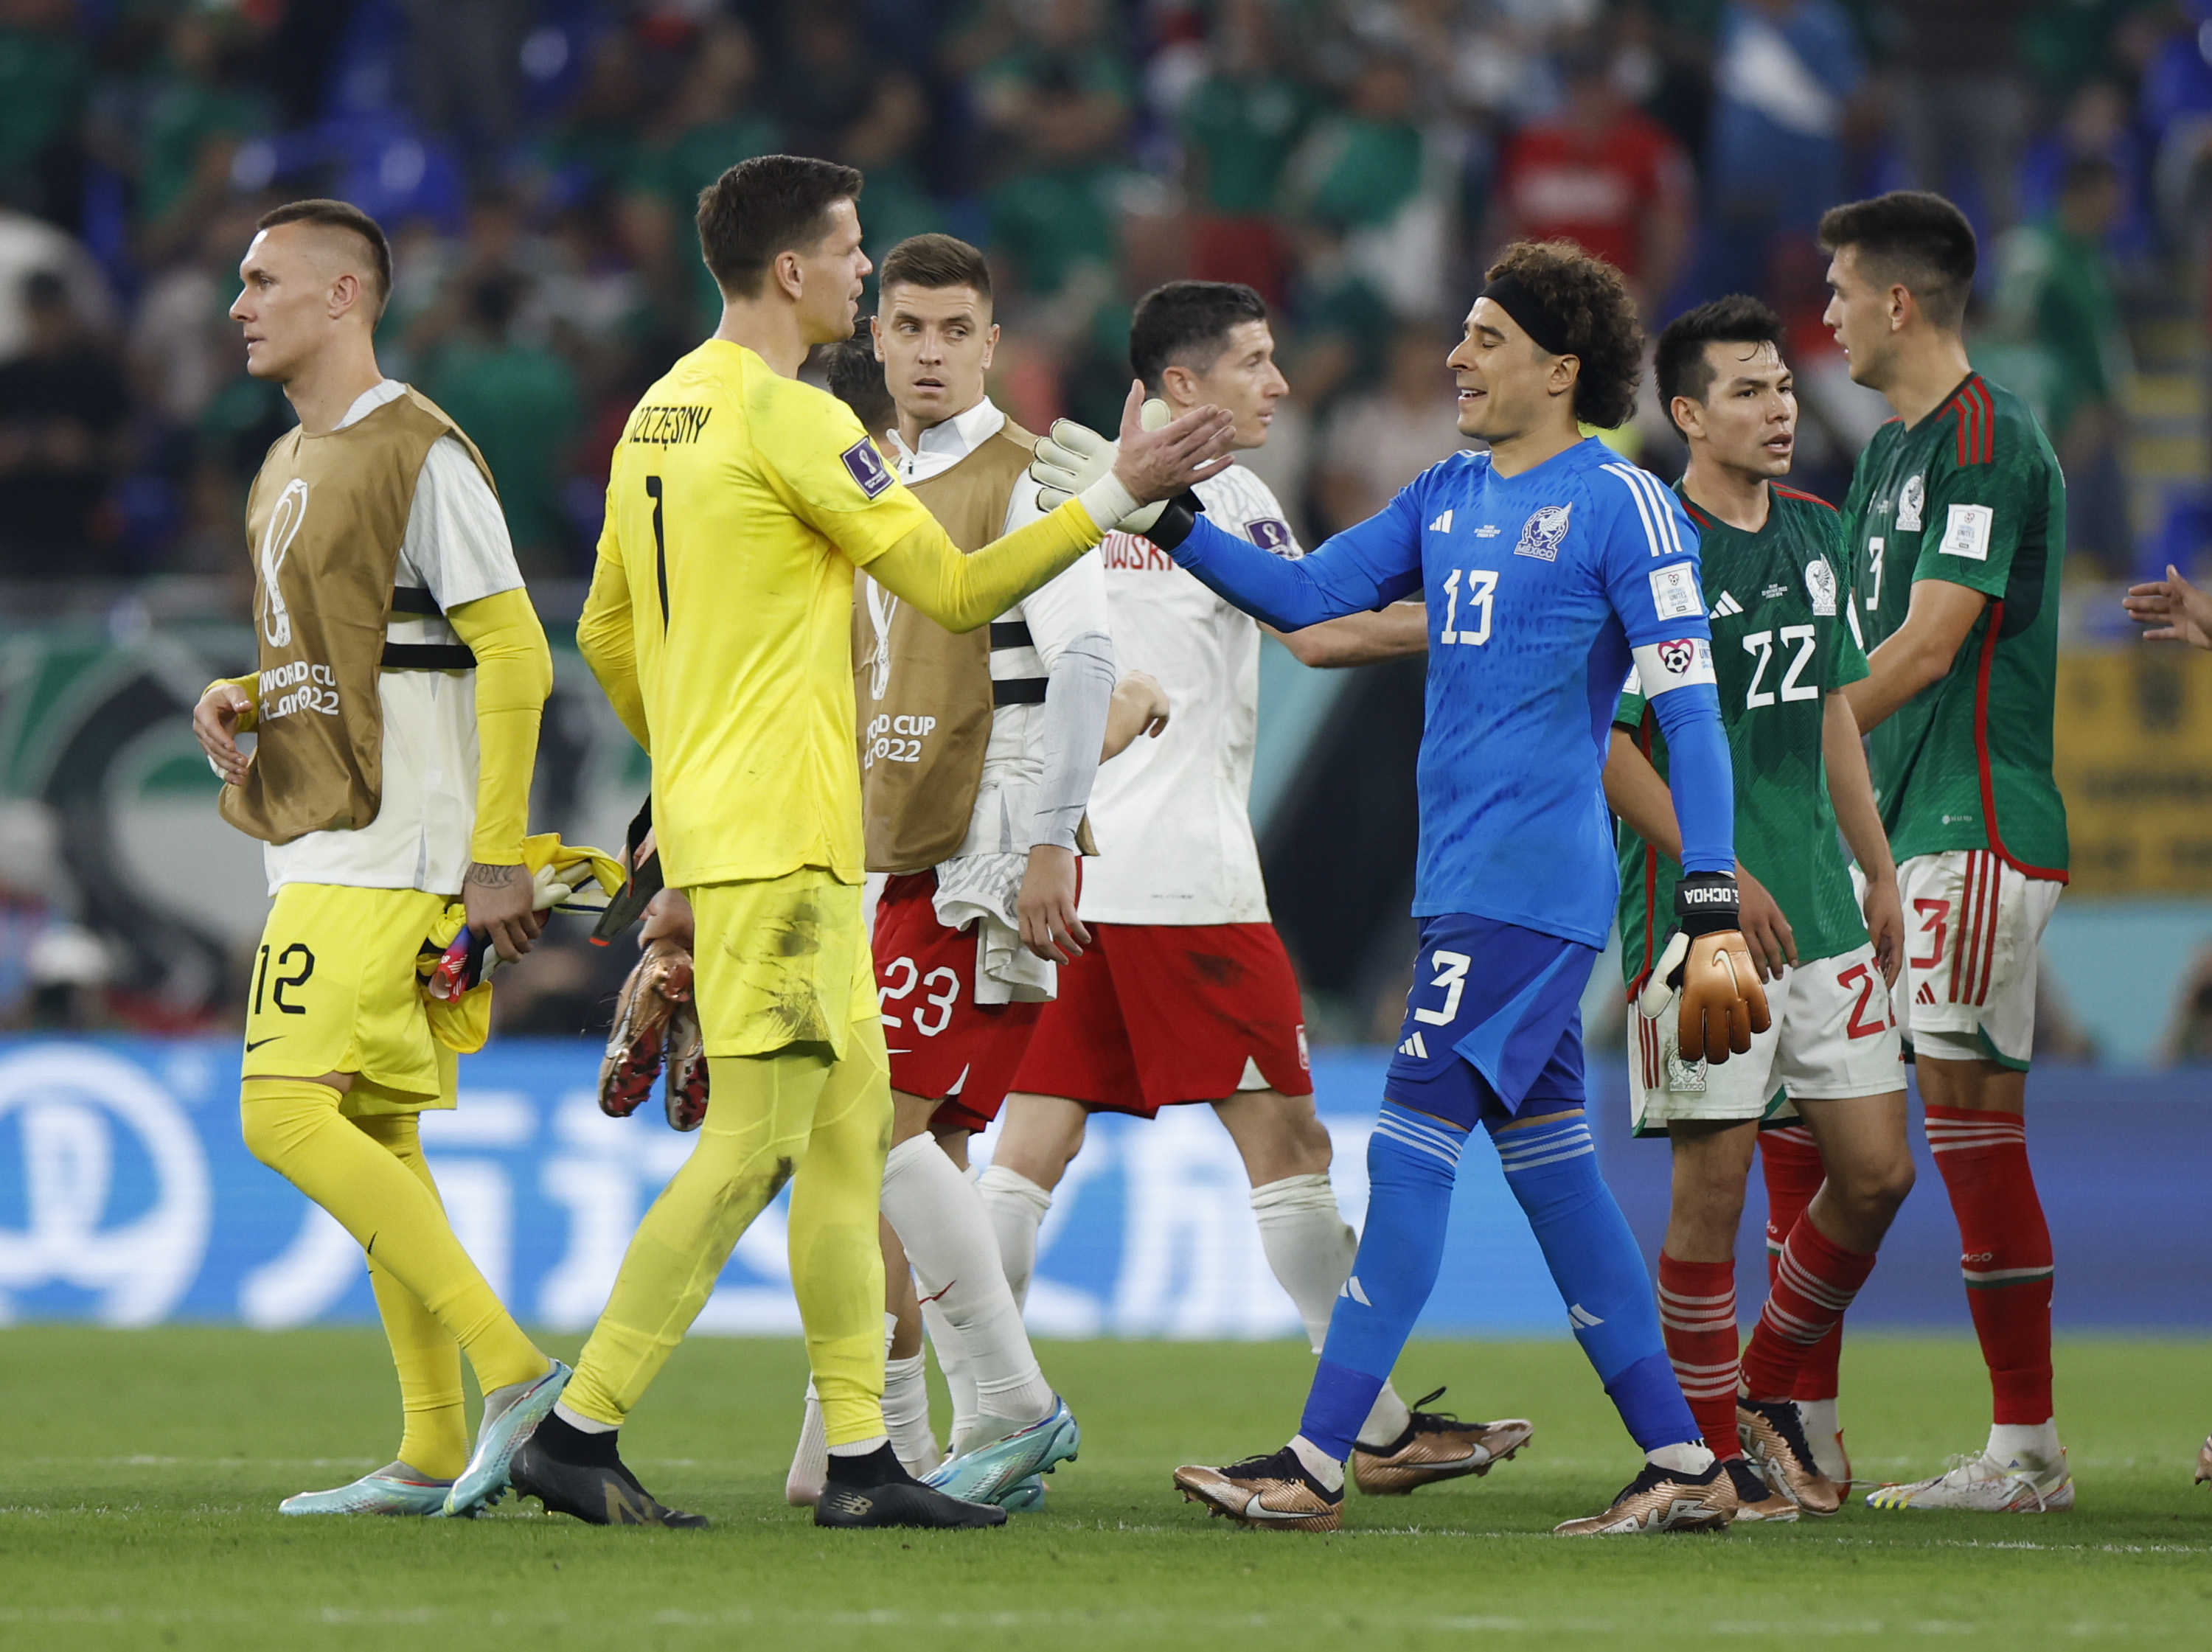 Guillermo Ochoa (R, front), goalkeeper of Mexico, vies with Wojciech Szczesny (L, front), goalkeeper of Poland, after the Group C match between Mexico and Poland of the 2022 FIFA World Cup at Ras Abu Aboud (974) Stadium in Doha, Qatar, Nov. 22, 2022.